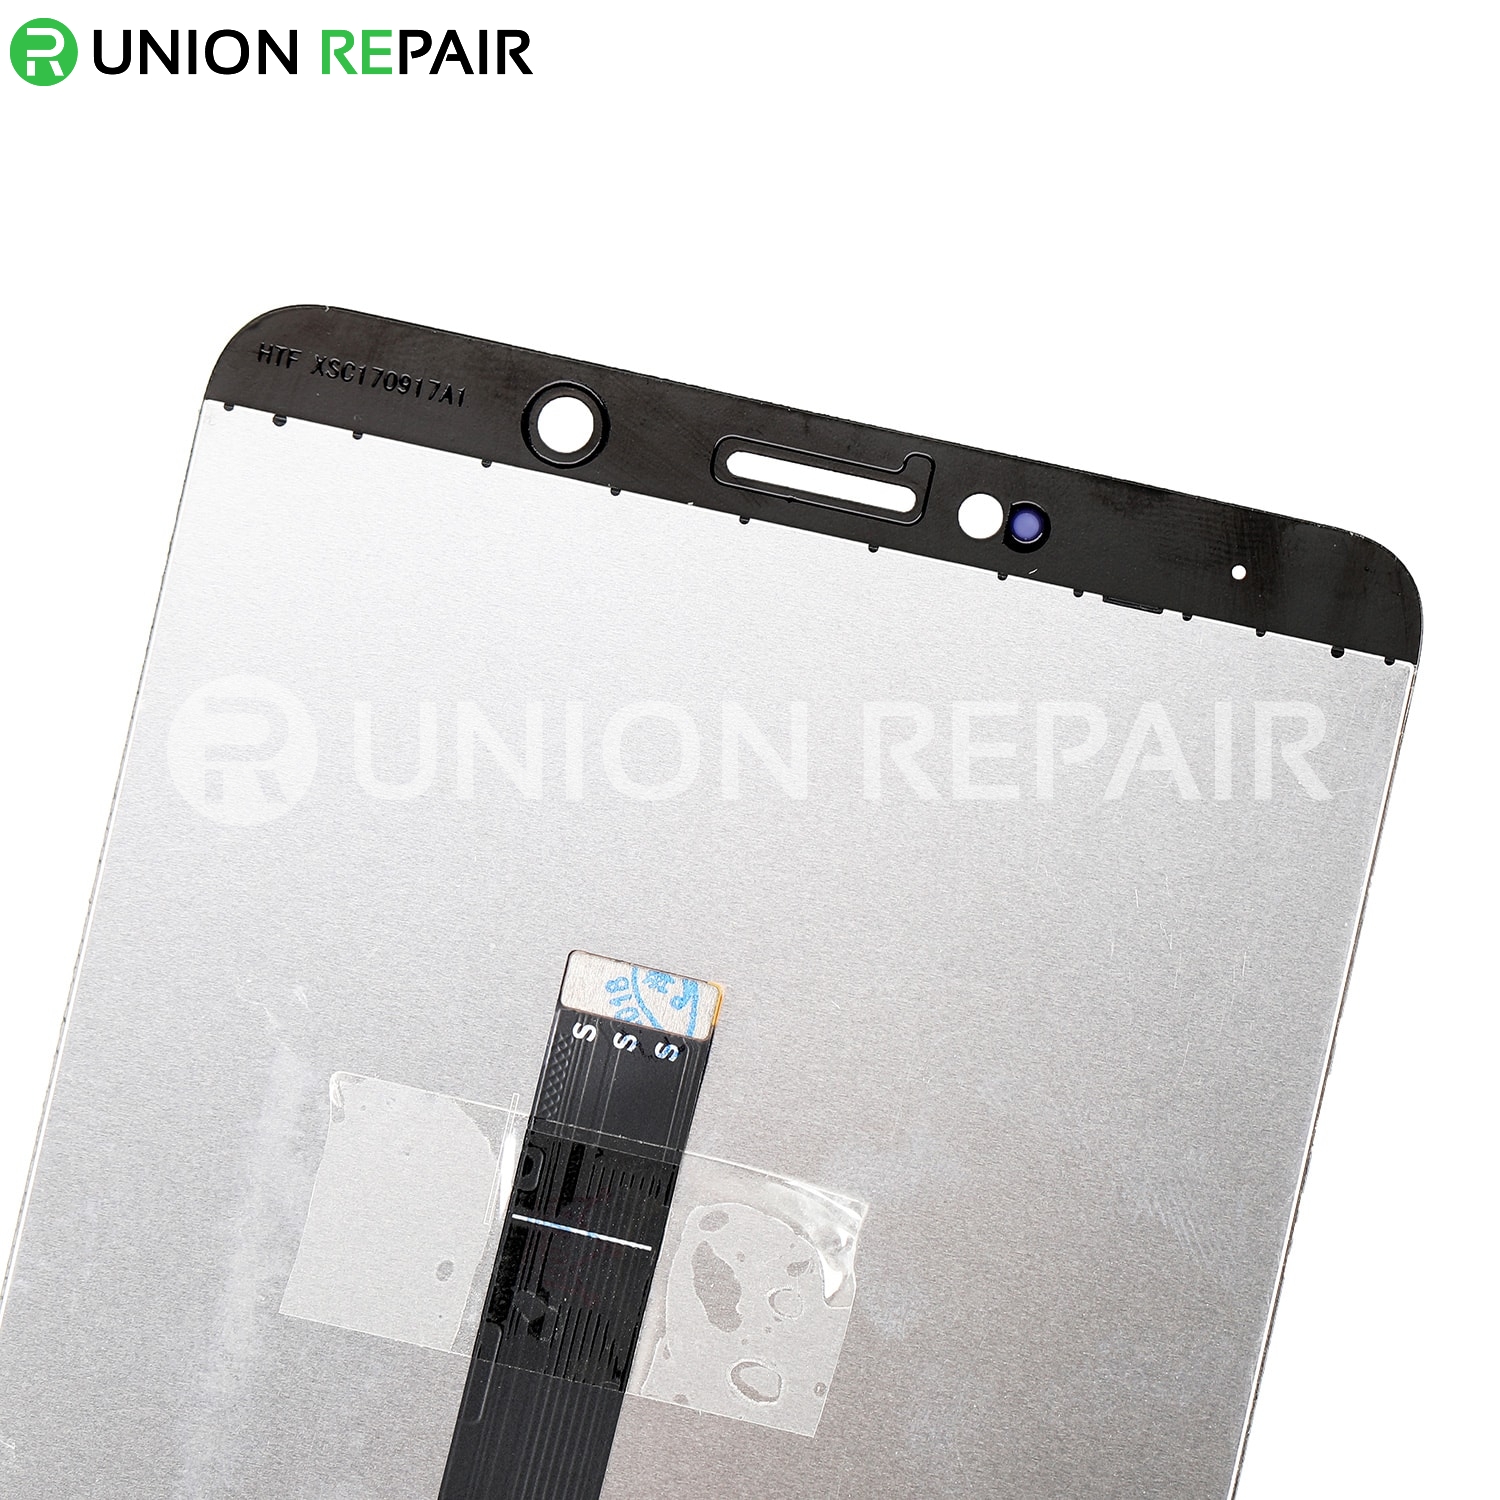  Replacement for Huawei Mate 10 LCD with Digitizer Assembly - White, fig. 1 